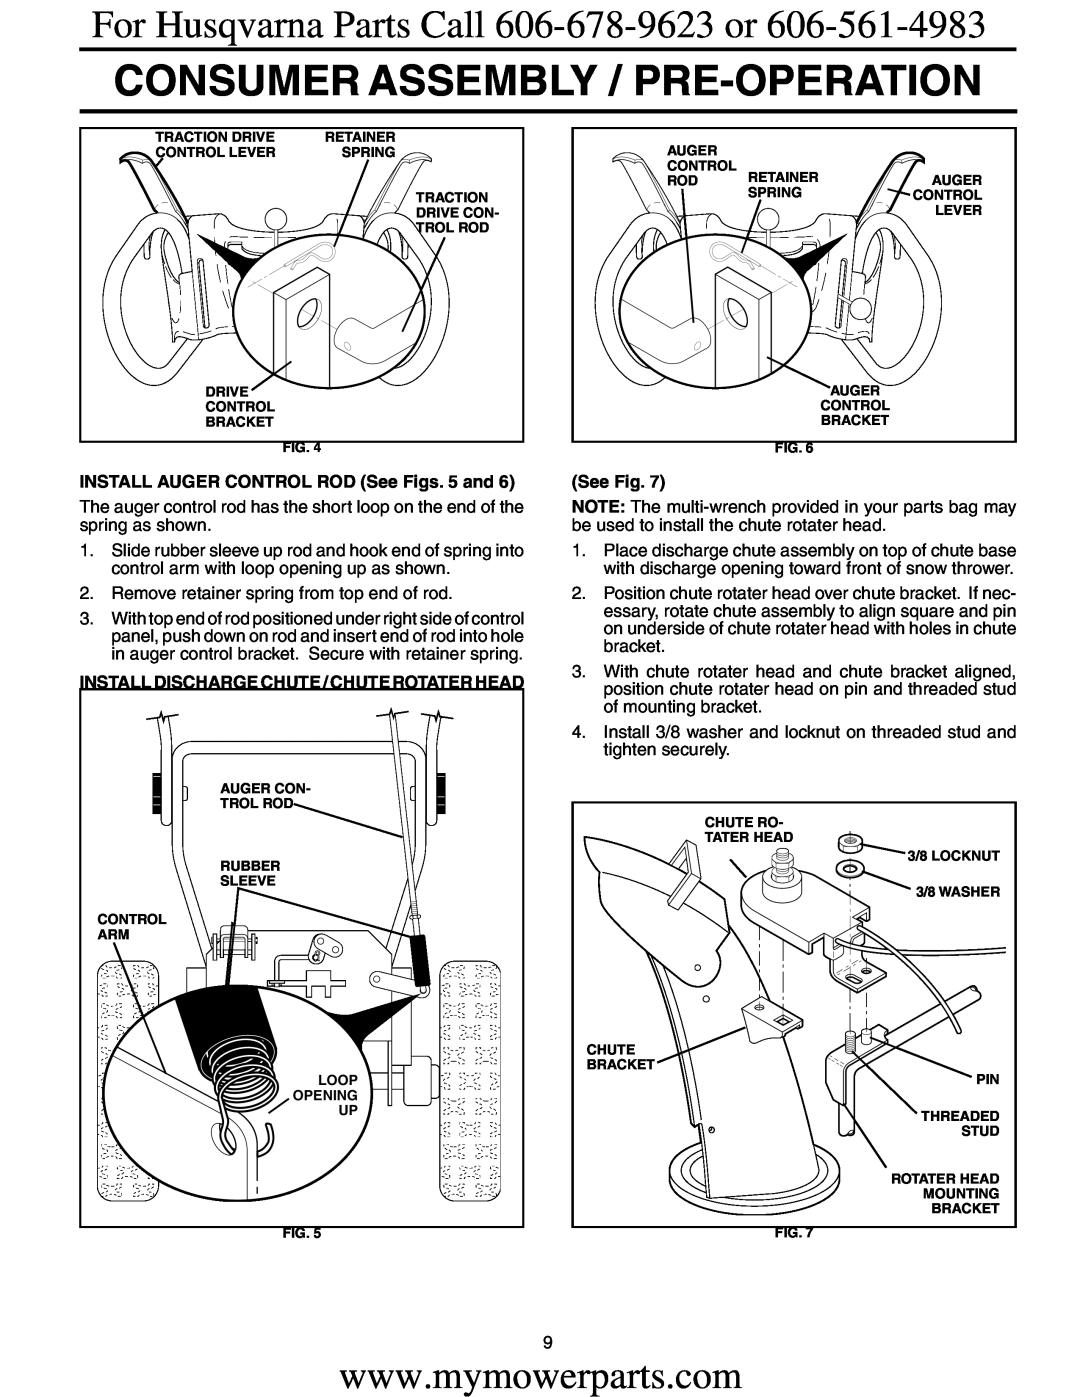 Electrolux OHV service manual Consumer Assembly / Pre-Operation, For Husqvarna Parts Call 606-678-9623 or, See Fig 